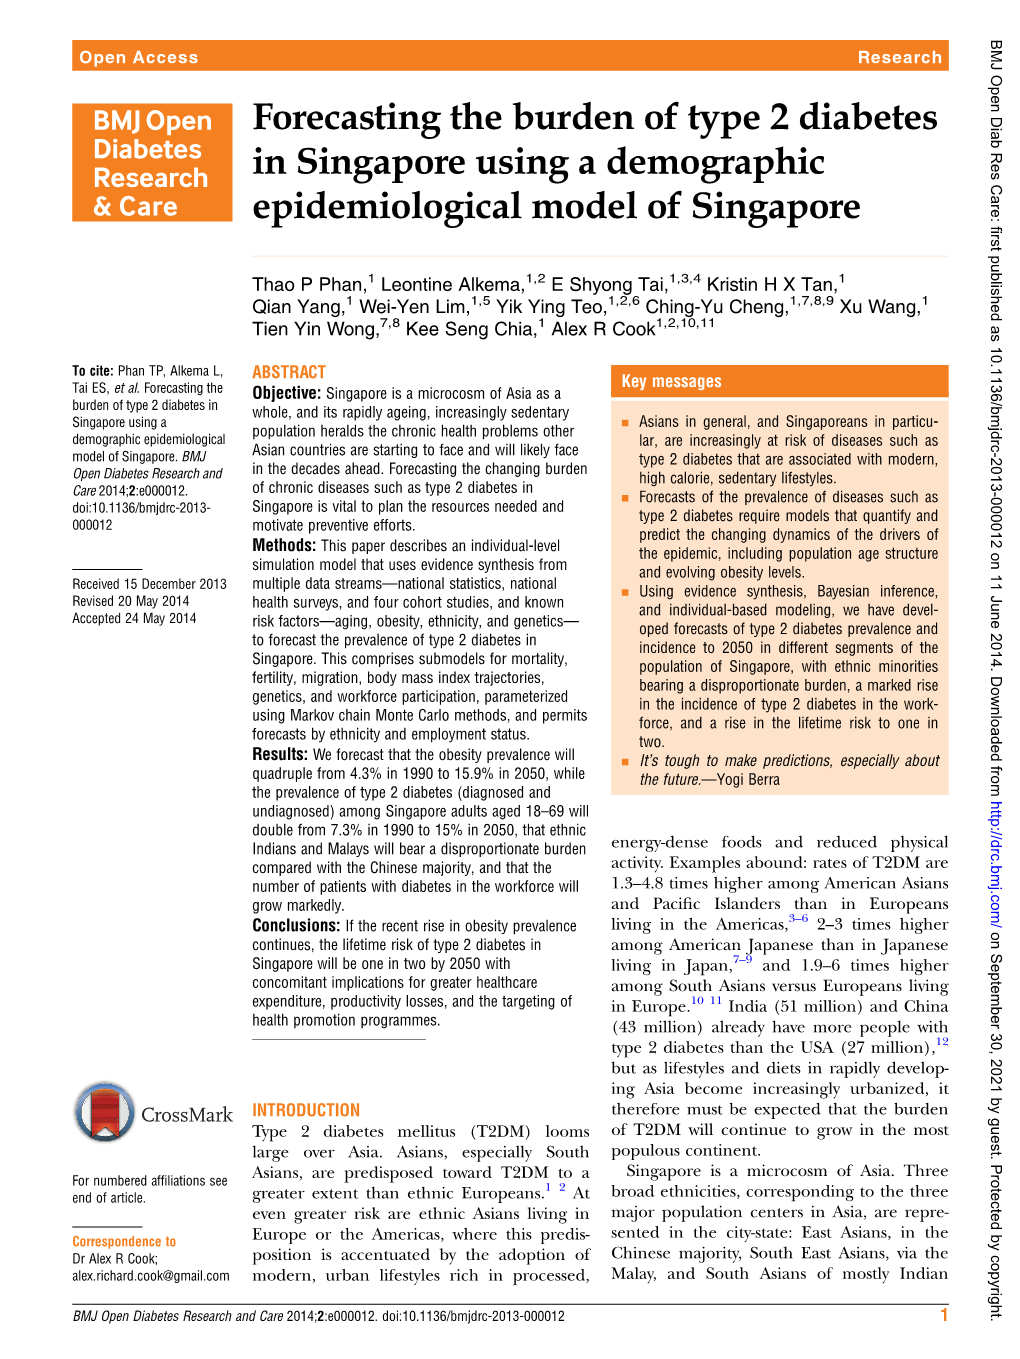 Forecasting the Burden of Type 2 Diabetes in Singapore Using a Demographic Epidemiological Model of Singapore